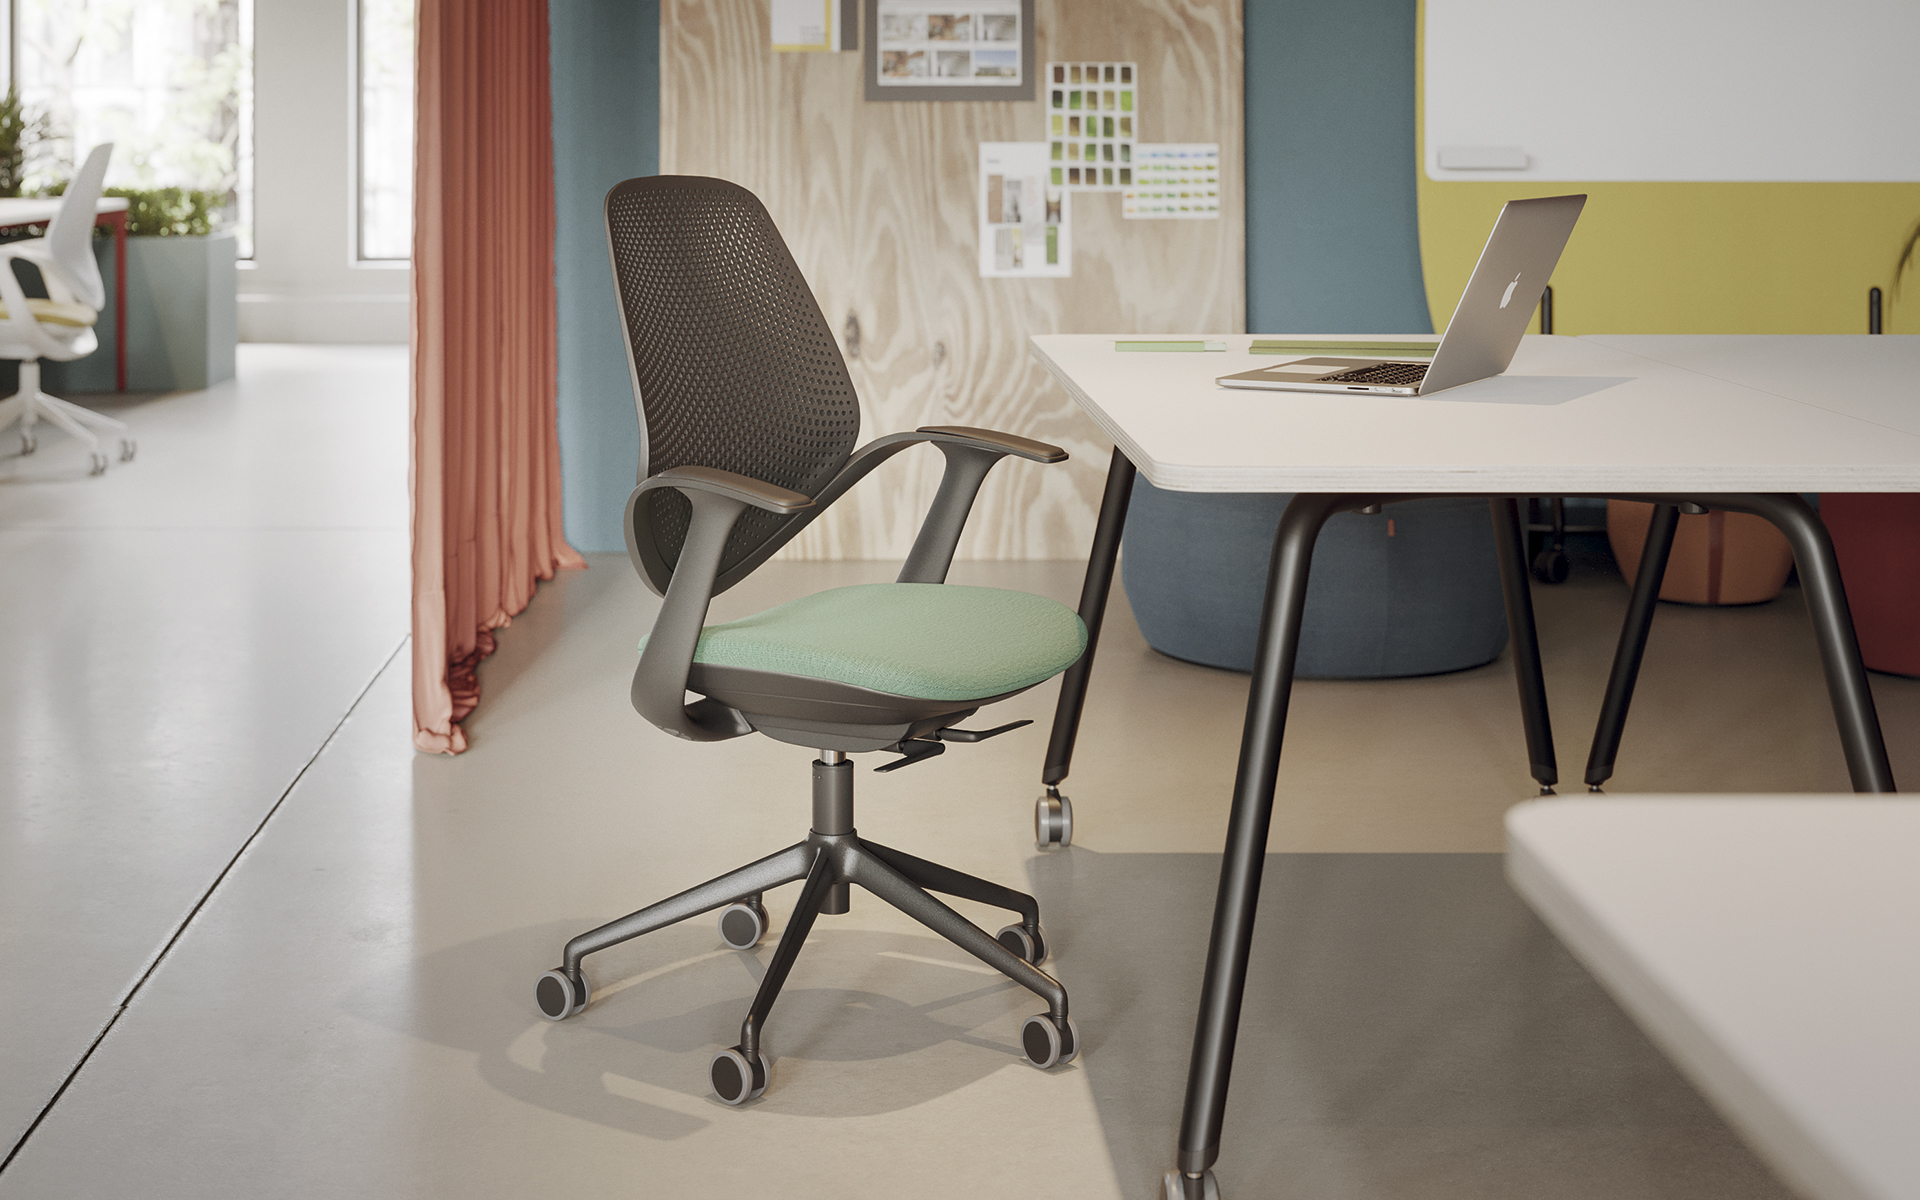 Forma 5 Flow office chair by ITO Design with padded seating surface in mint, back and armrests in dark grey in front of a desk in a bright, open office.